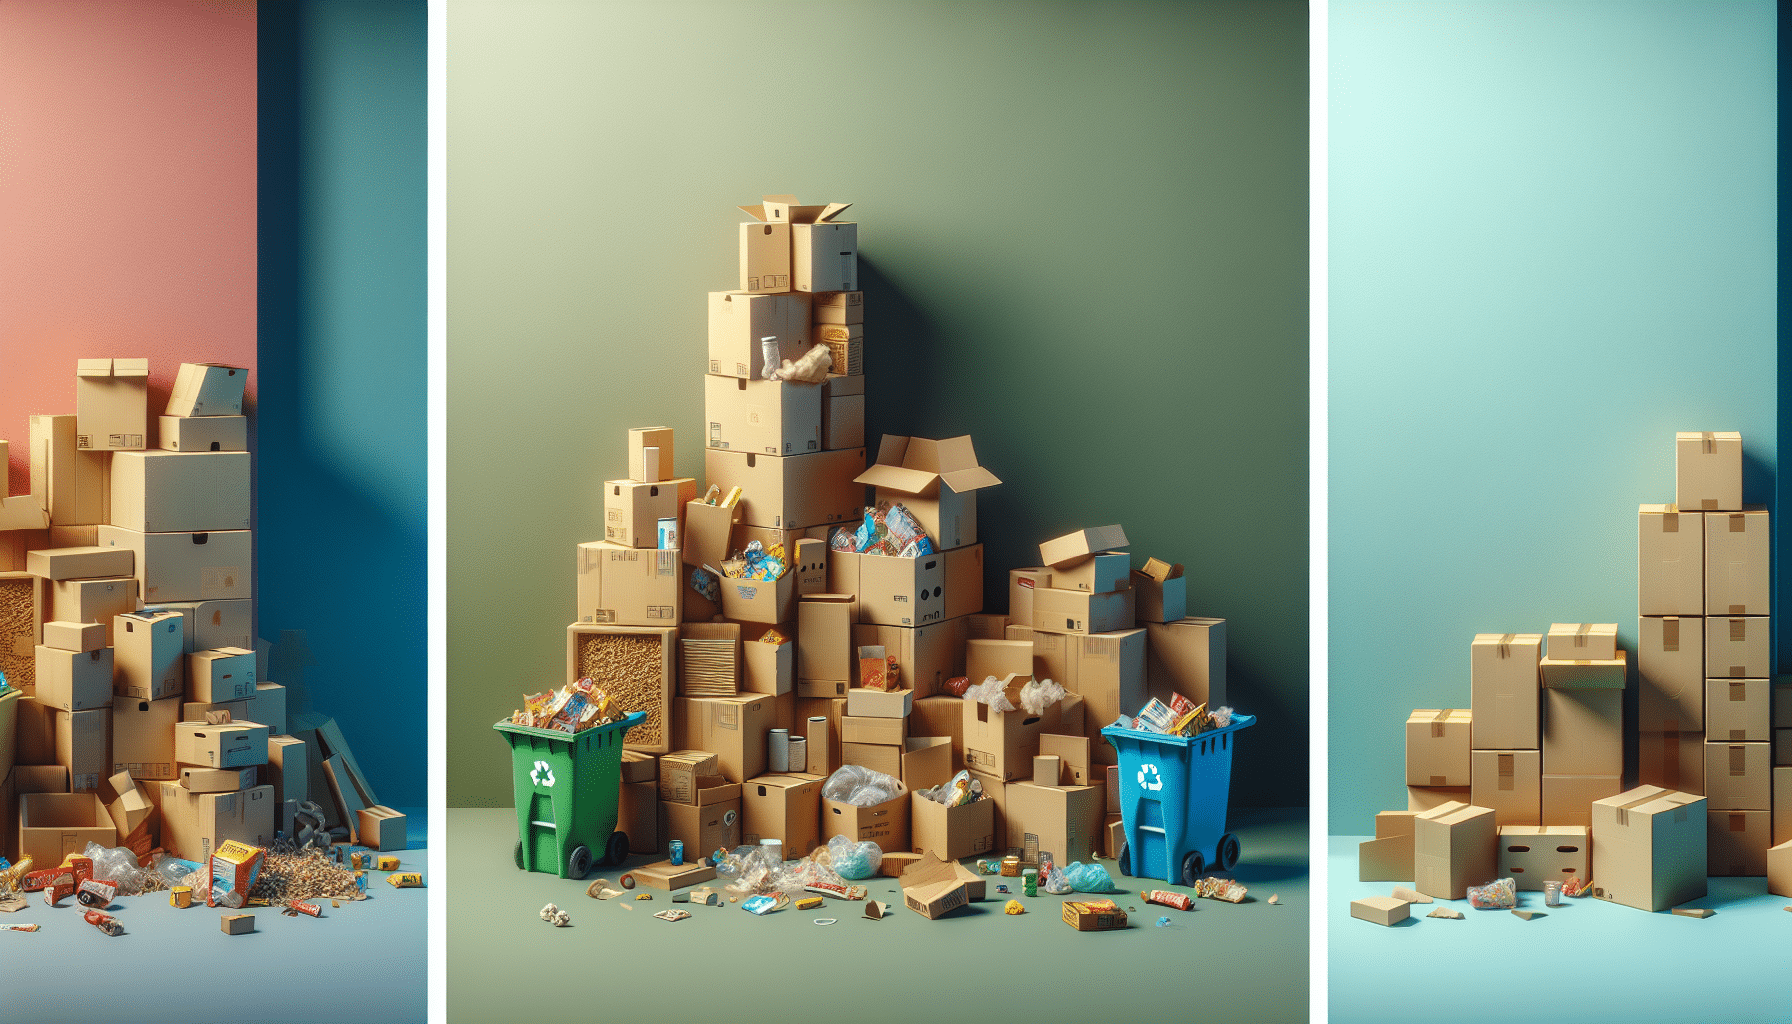 Cardboard boxes journey: usage, recycling and renewal depicted